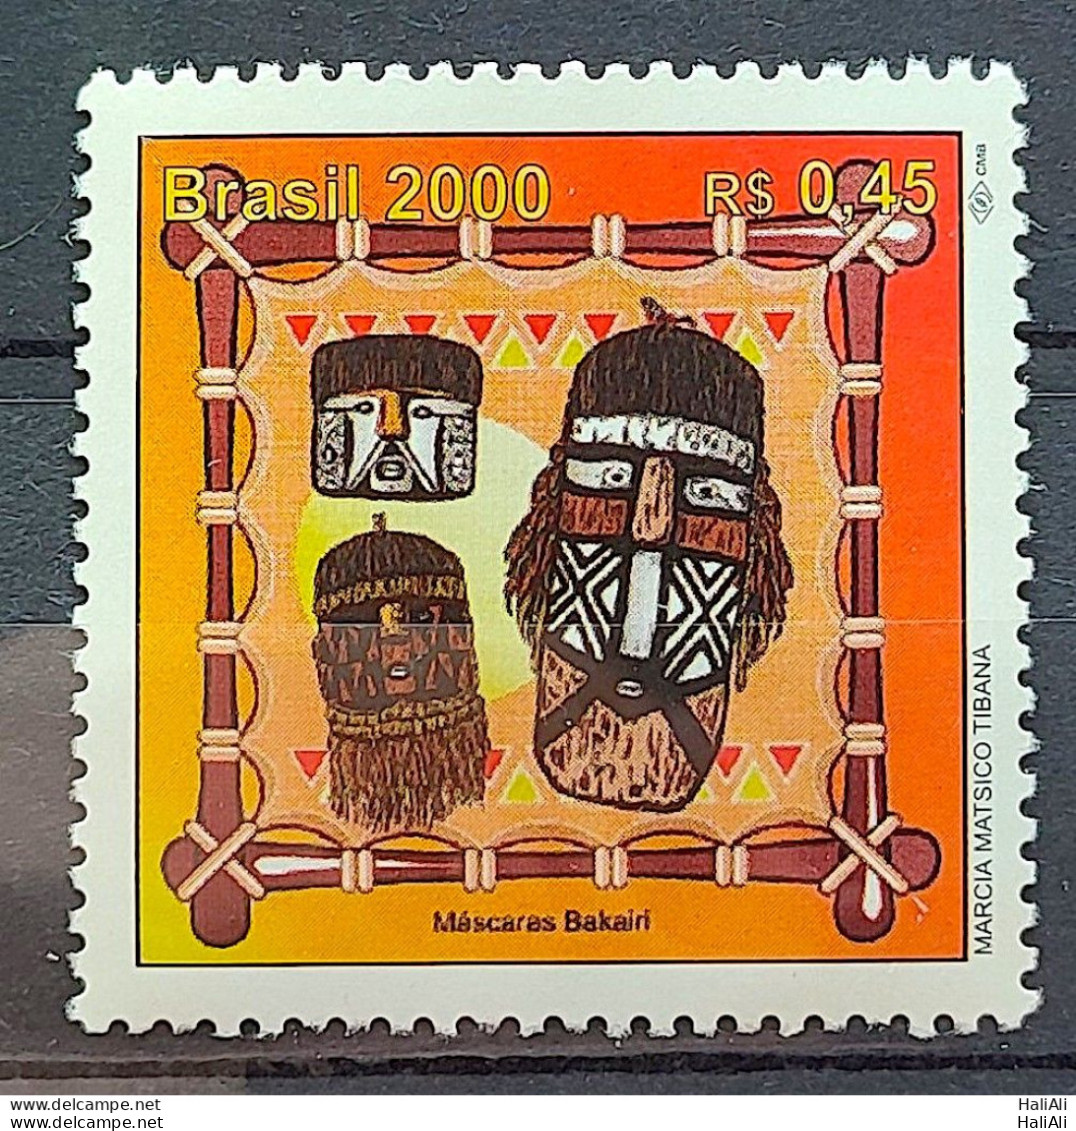 C 2273 Brazil Stamp 500 Years Discovery Of Brazil 2000 Mascara Indian Bakairi Clm - Unused Stamps